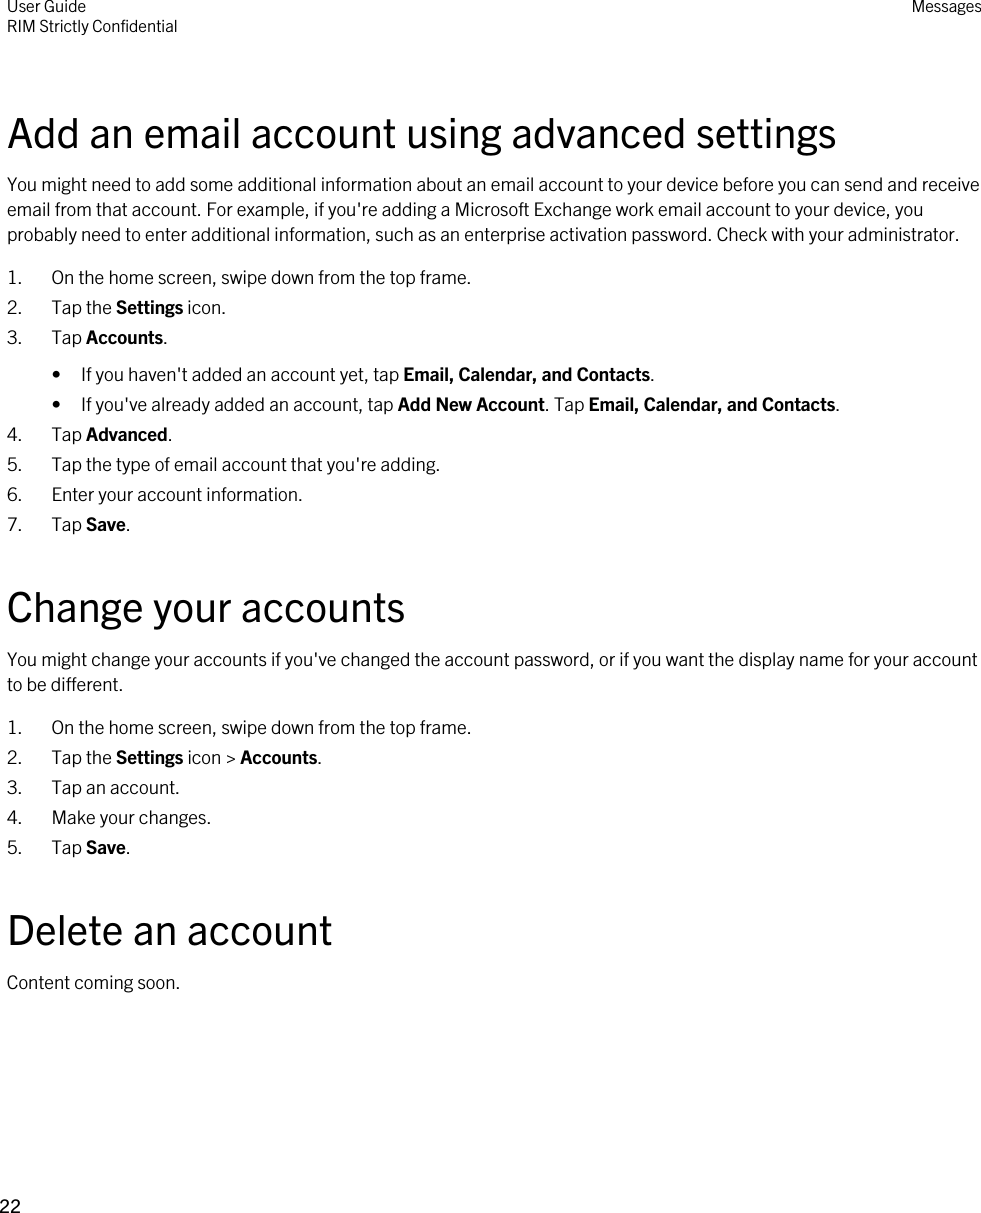 Add an email account using advanced settingsYou might need to add some additional information about an email account to your device before you can send and receive email from that account. For example, if you&apos;re adding a Microsoft Exchange work email account to your device, you probably need to enter additional information, such as an enterprise activation password. Check with your administrator.1. On the home screen, swipe down from the top frame.2. Tap the Settings icon.3. Tap Accounts.• If you haven&apos;t added an account yet, tap Email, Calendar, and Contacts.• If you&apos;ve already added an account, tap Add New Account. Tap Email, Calendar, and Contacts.4. Tap Advanced.5. Tap the type of email account that you&apos;re adding.6. Enter your account information.7. Tap Save.Change your accountsYou might change your accounts if you&apos;ve changed the account password, or if you want the display name for your account to be different.1. On the home screen, swipe down from the top frame.2. Tap the Settings icon &gt; Accounts.3. Tap an account.4. Make your changes.5. Tap Save.Delete an accountContent coming soon.User GuideRIM Strictly Confidential Messages22 